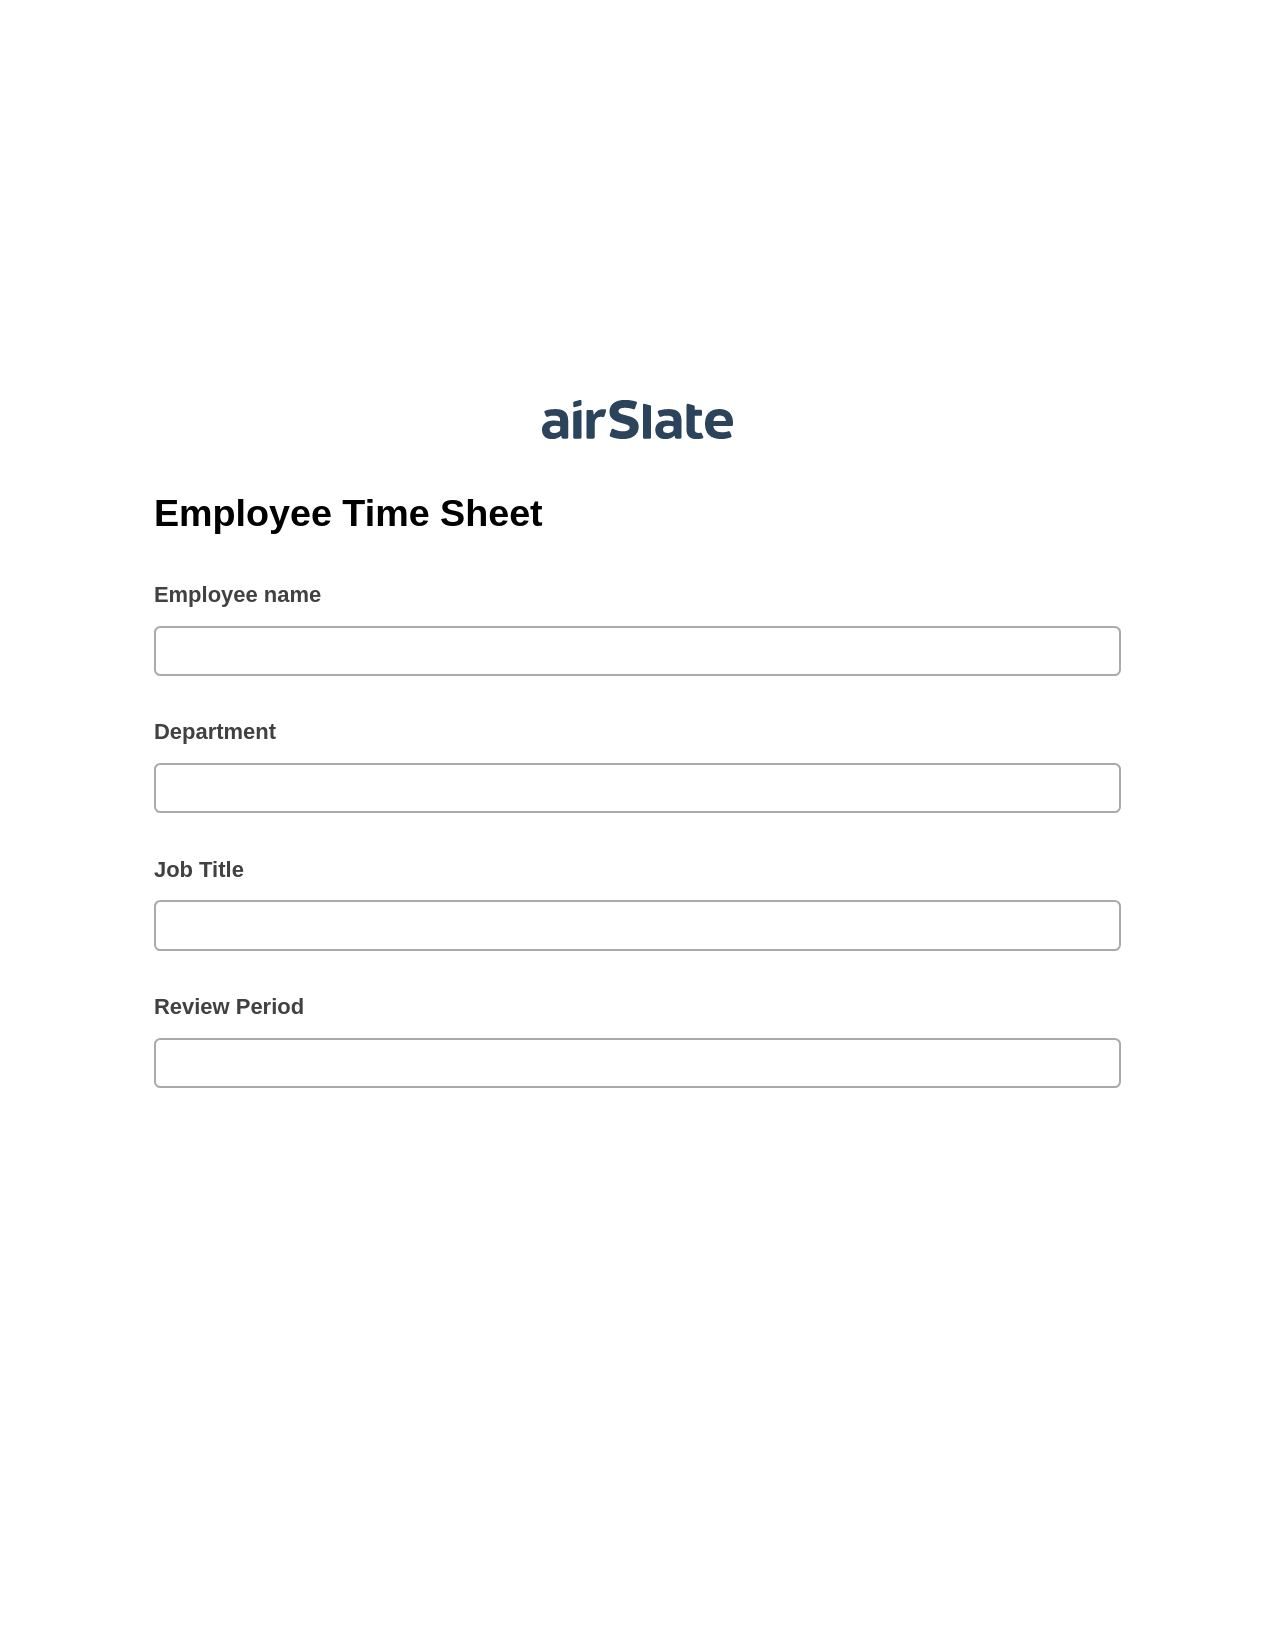 Employee Time Sheet Prefill from NetSuite records, Google Cloud Print Bot, Export to Smartsheet